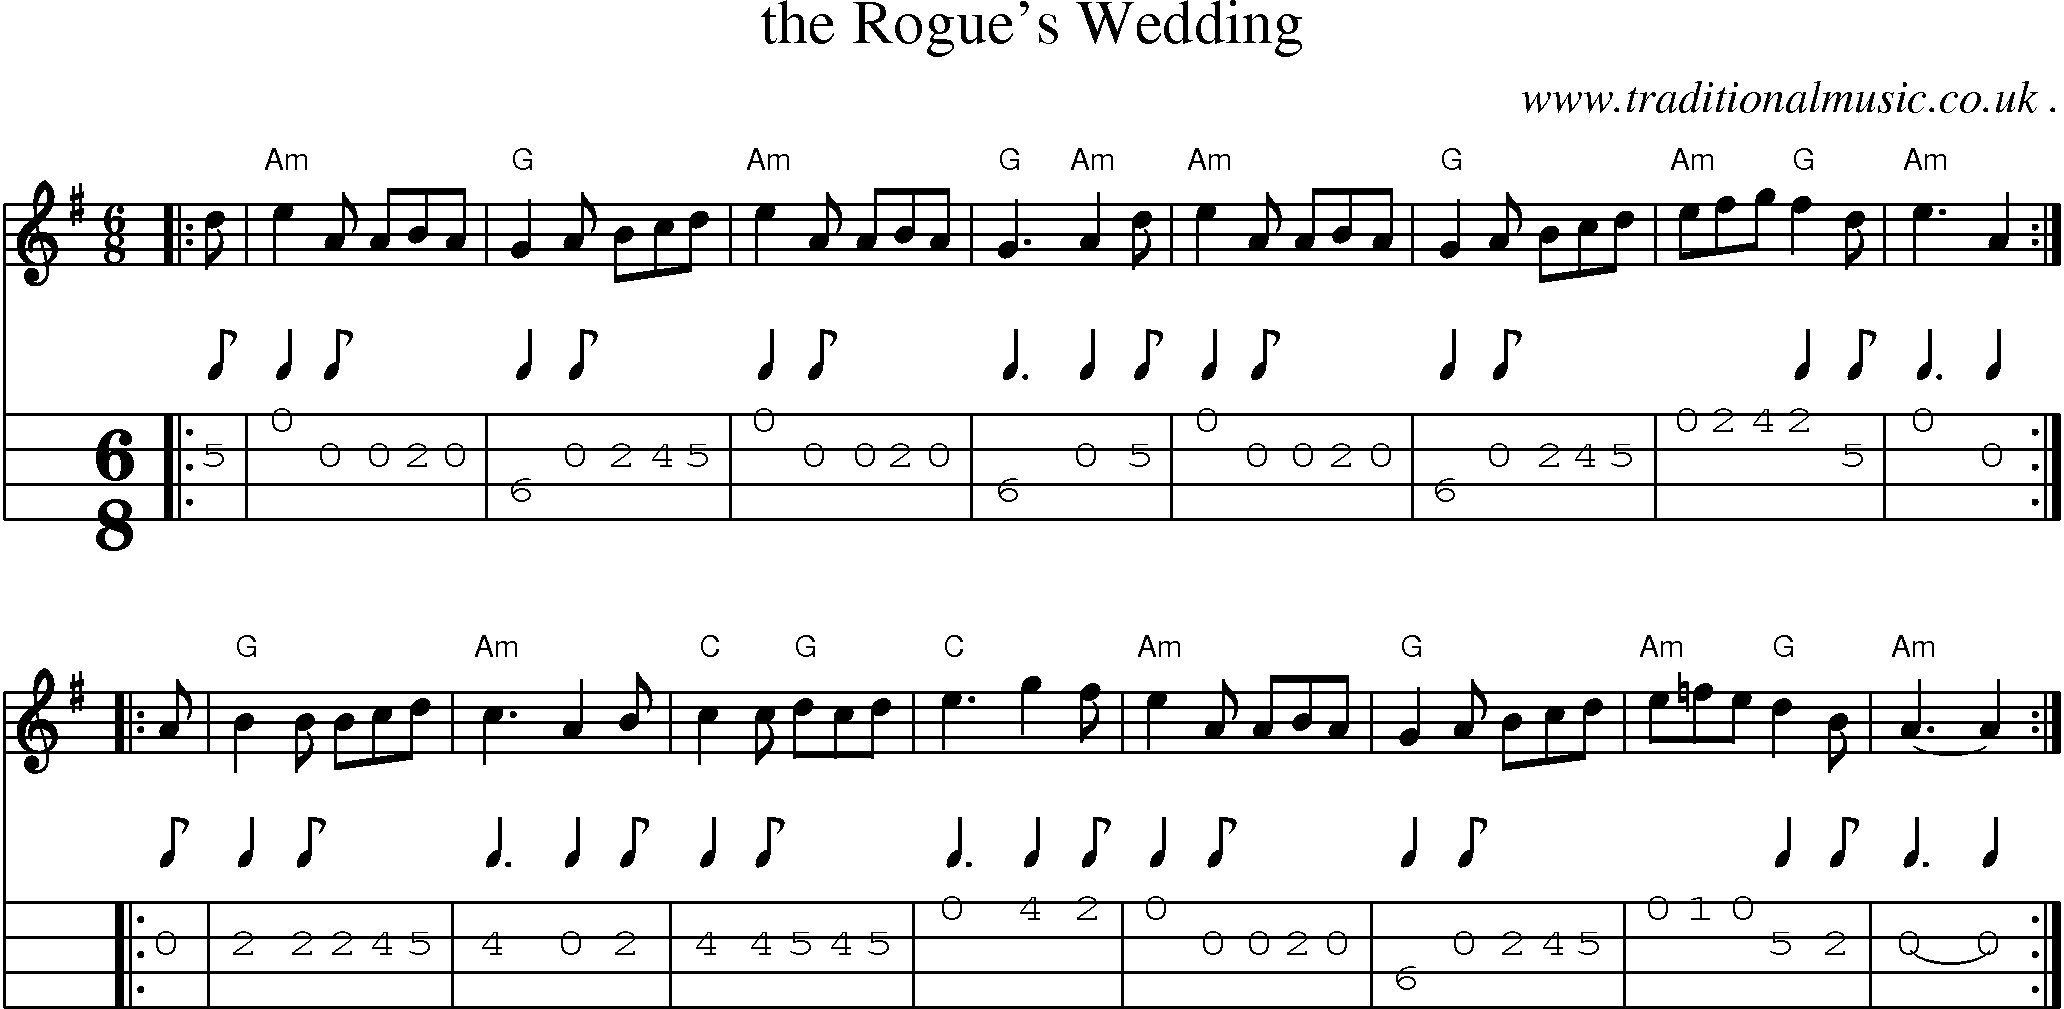 Sheet-music  score, Chords and Mandolin Tabs for The Rogues Wedding